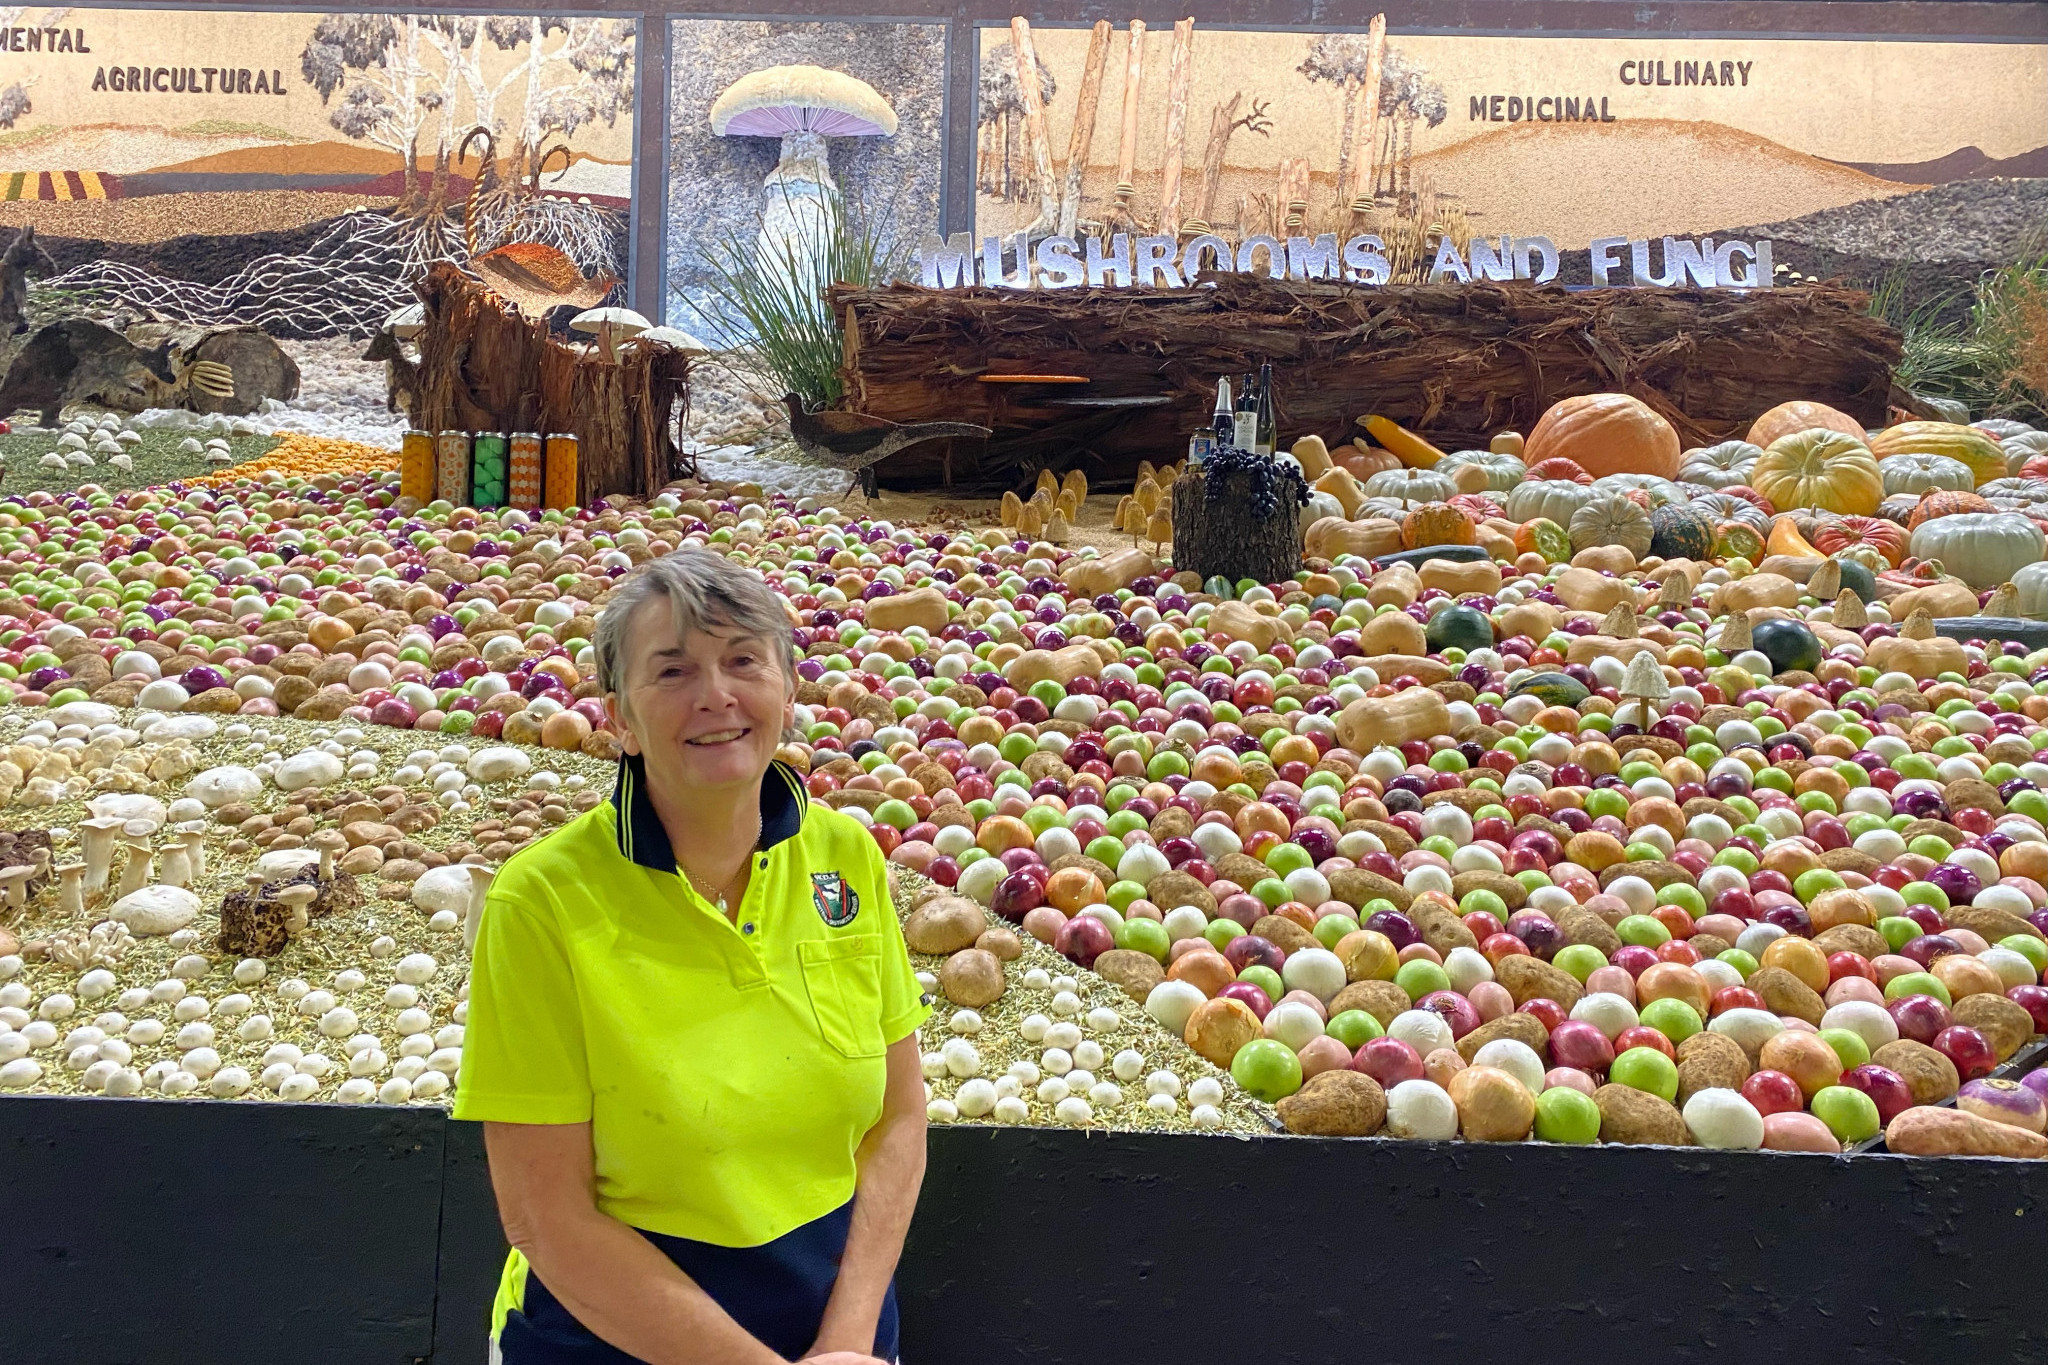 Gilgandra’s Margaret Windeyer is again part of the Western District Exhibit team at the Sydney Royal Easter Show.